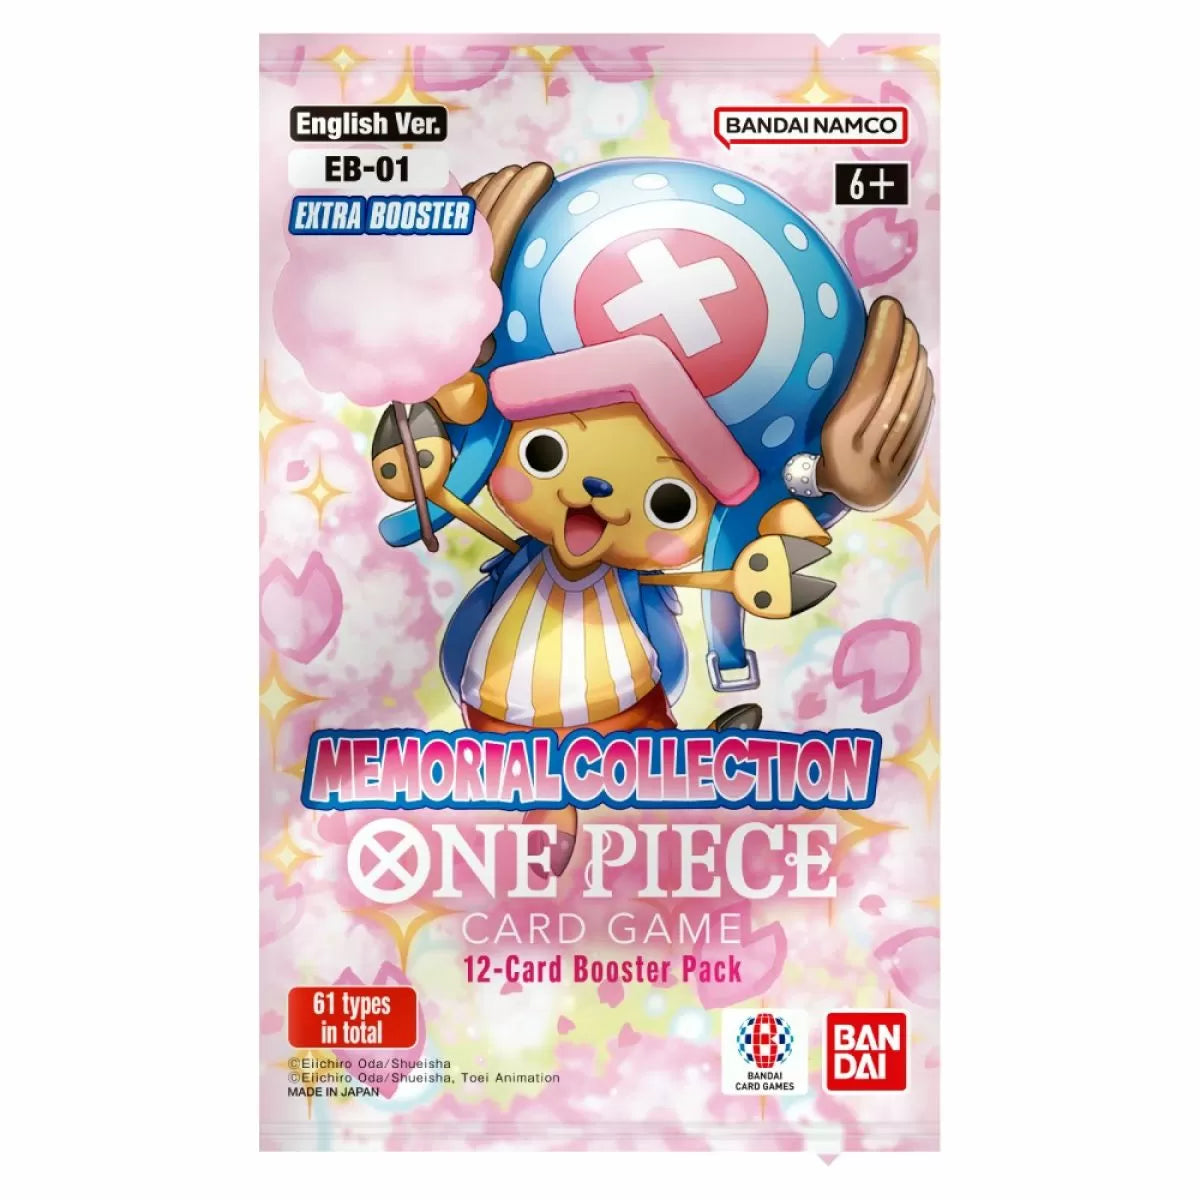 One Piece TCG - Memorial Collection Extra Booster Pack (EB-01) *Sealed* (PRE-ORDER, SHIPS MAY 3RD)